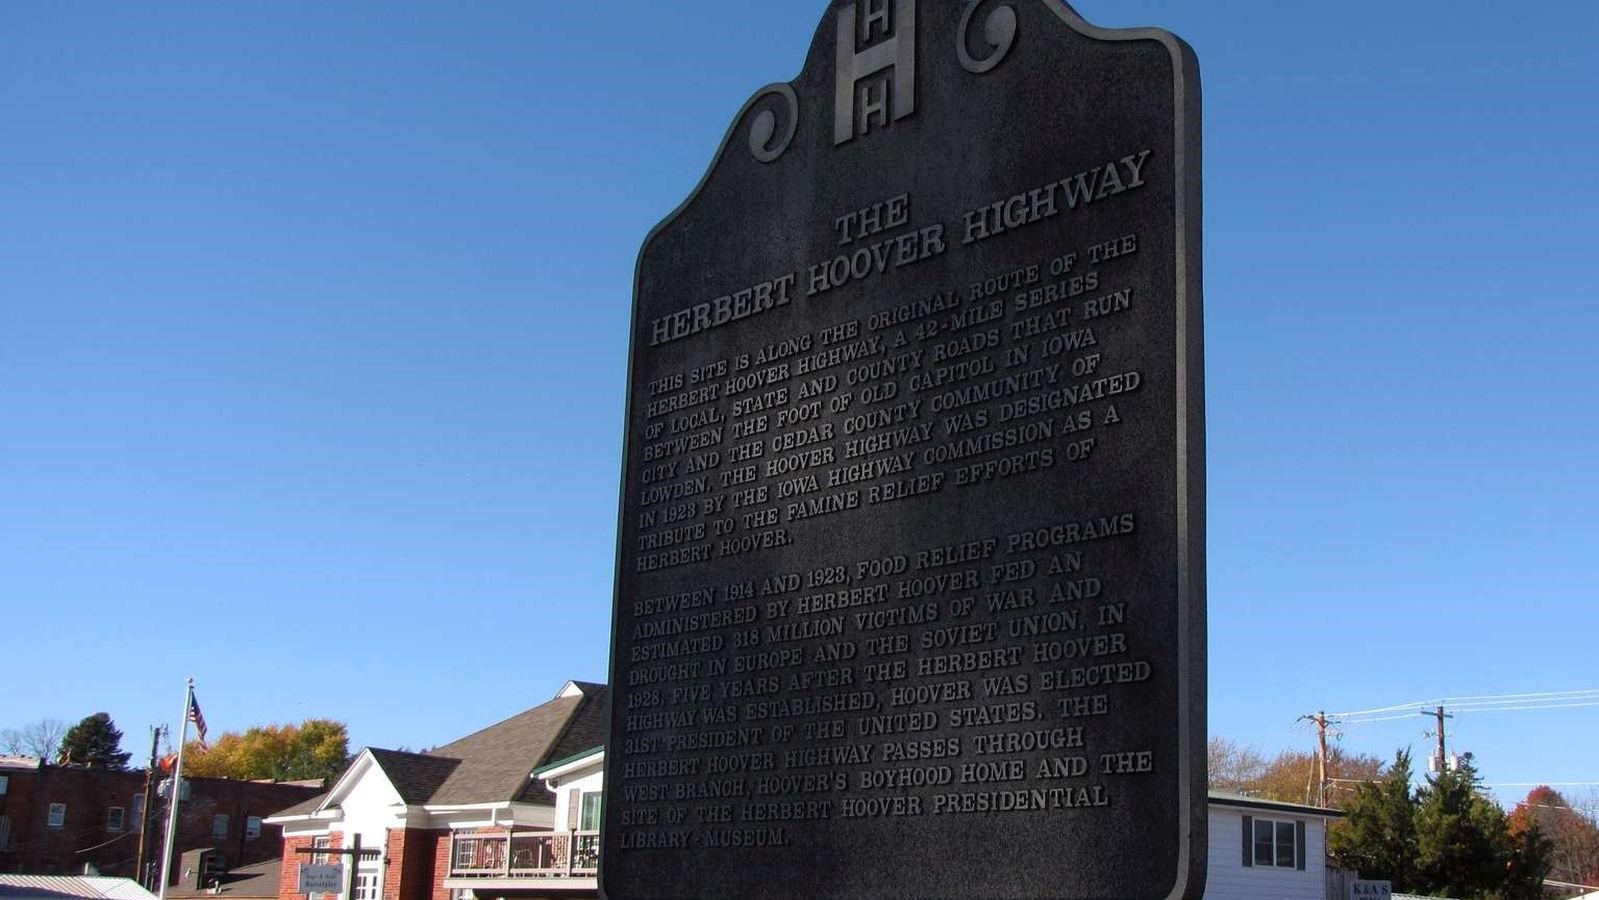 A bronze sign on a post marks the city street behind it as part of historic scenic highway.